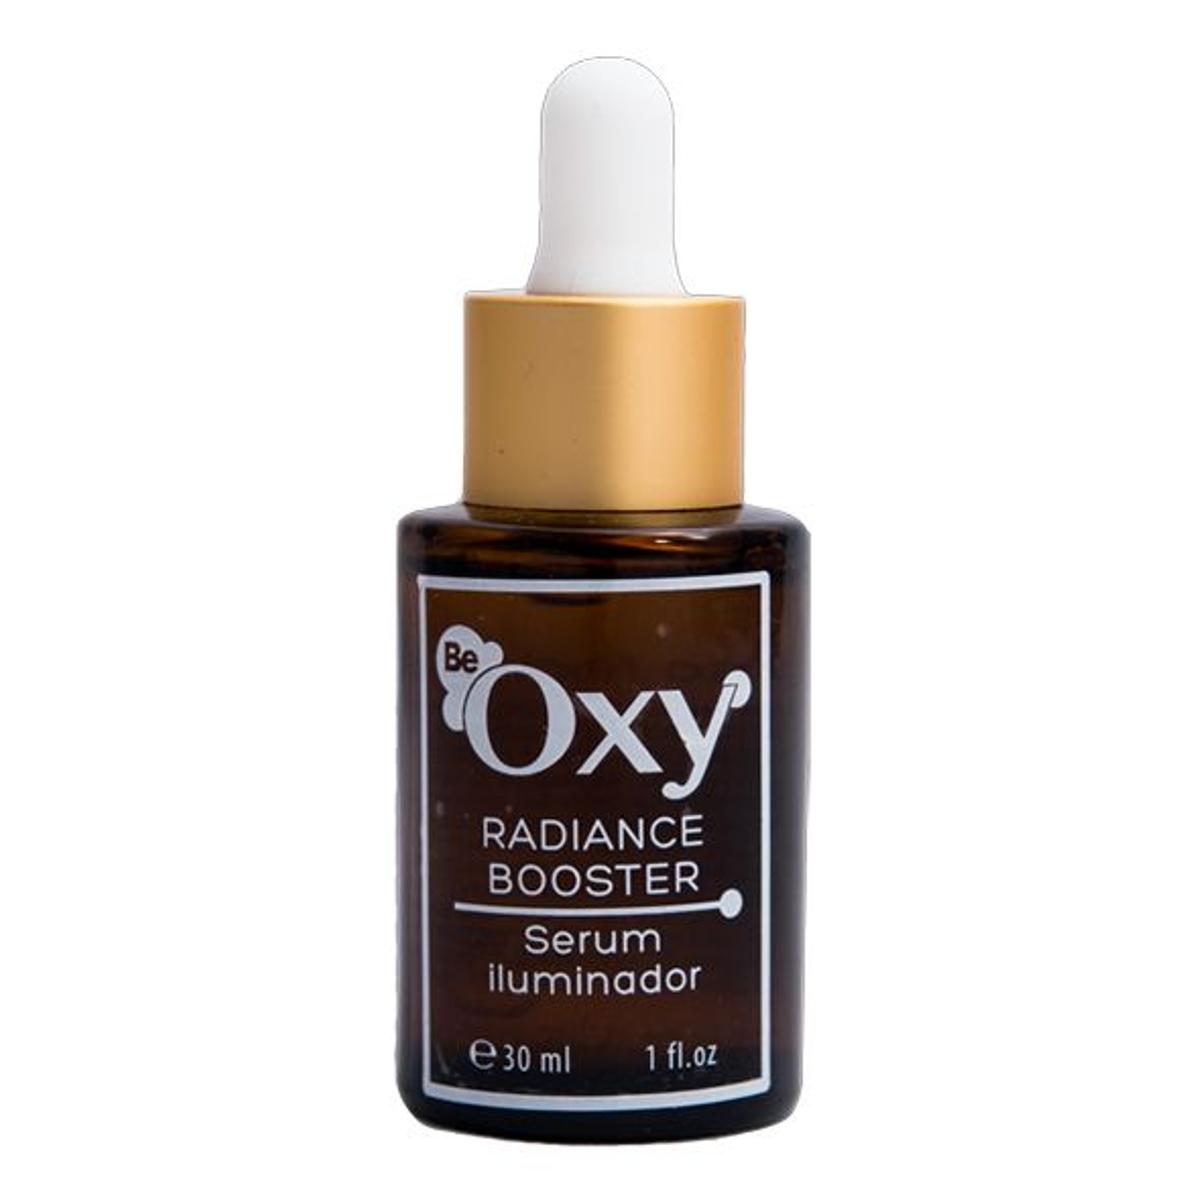 Radiance Booster, Be Oxy